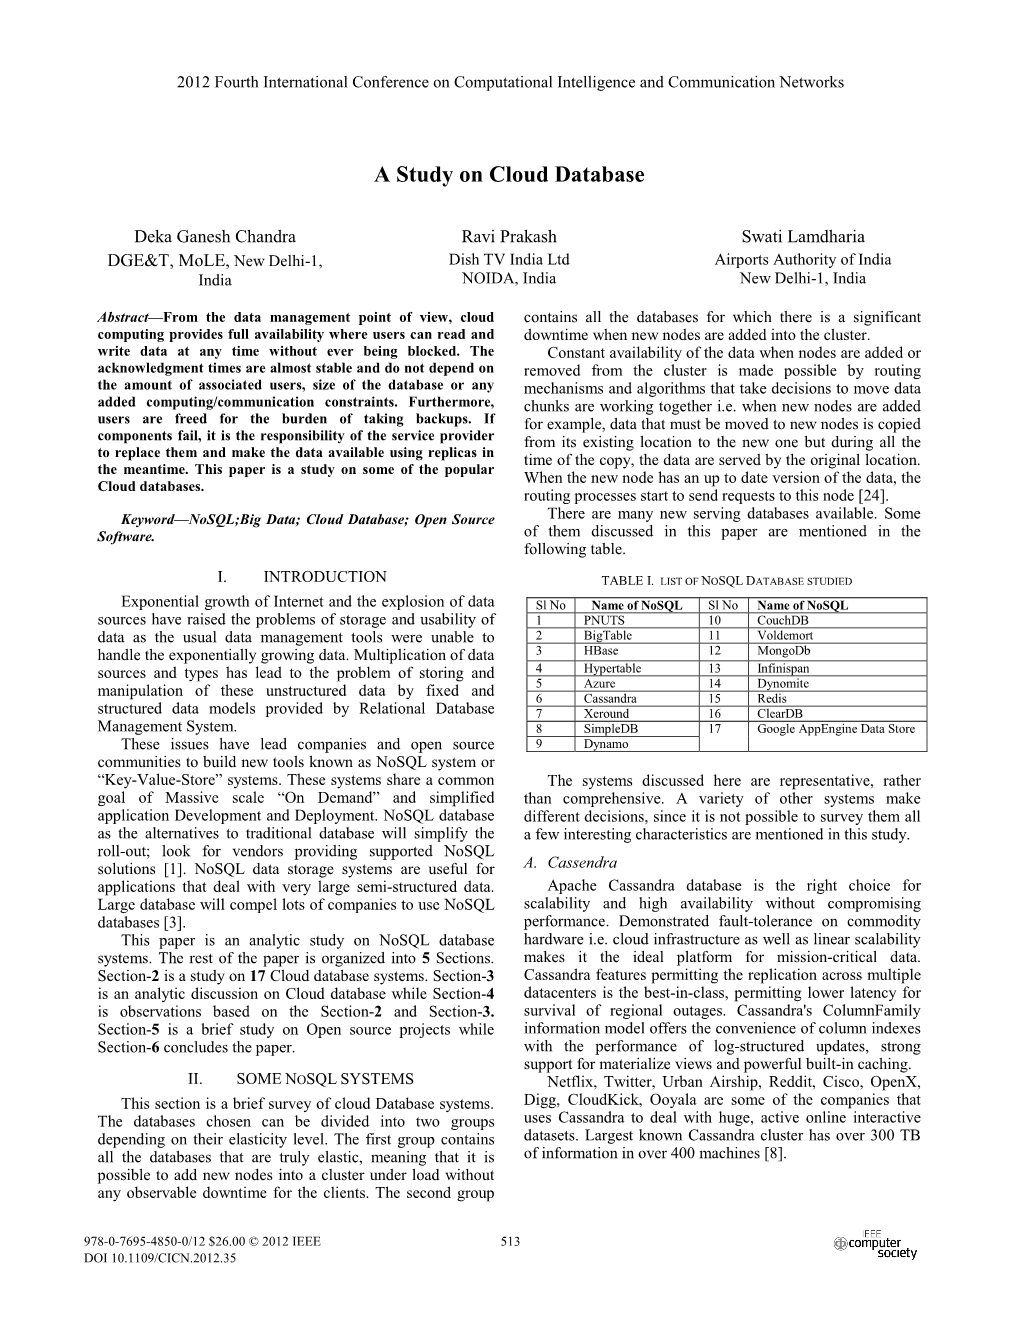 A Study on Cloud Database